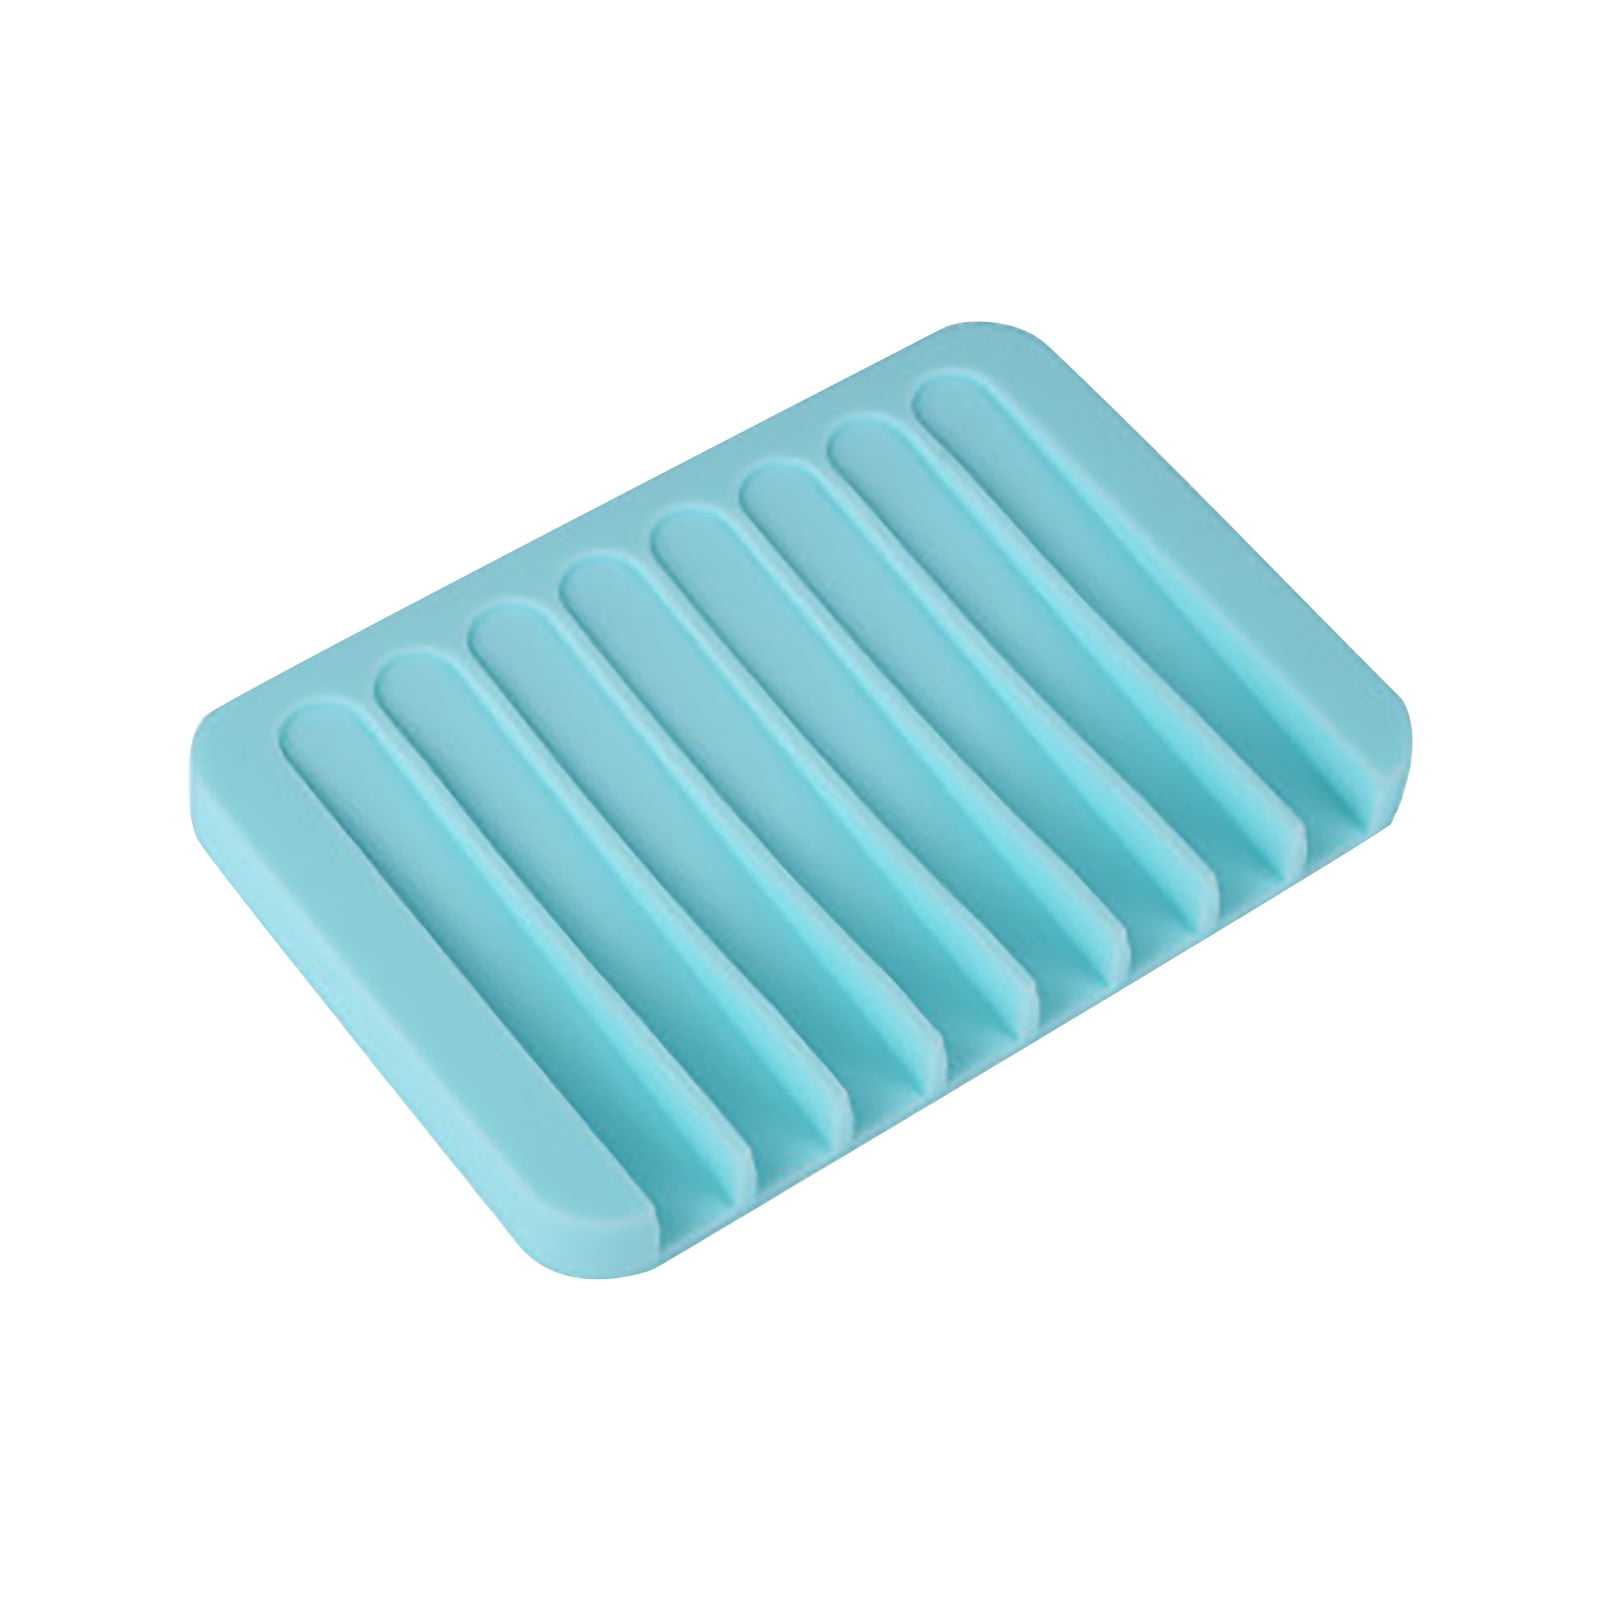 Silicone Soap Holder Flexible Soap Dish Plate Holder Tray Soap Box Containng 